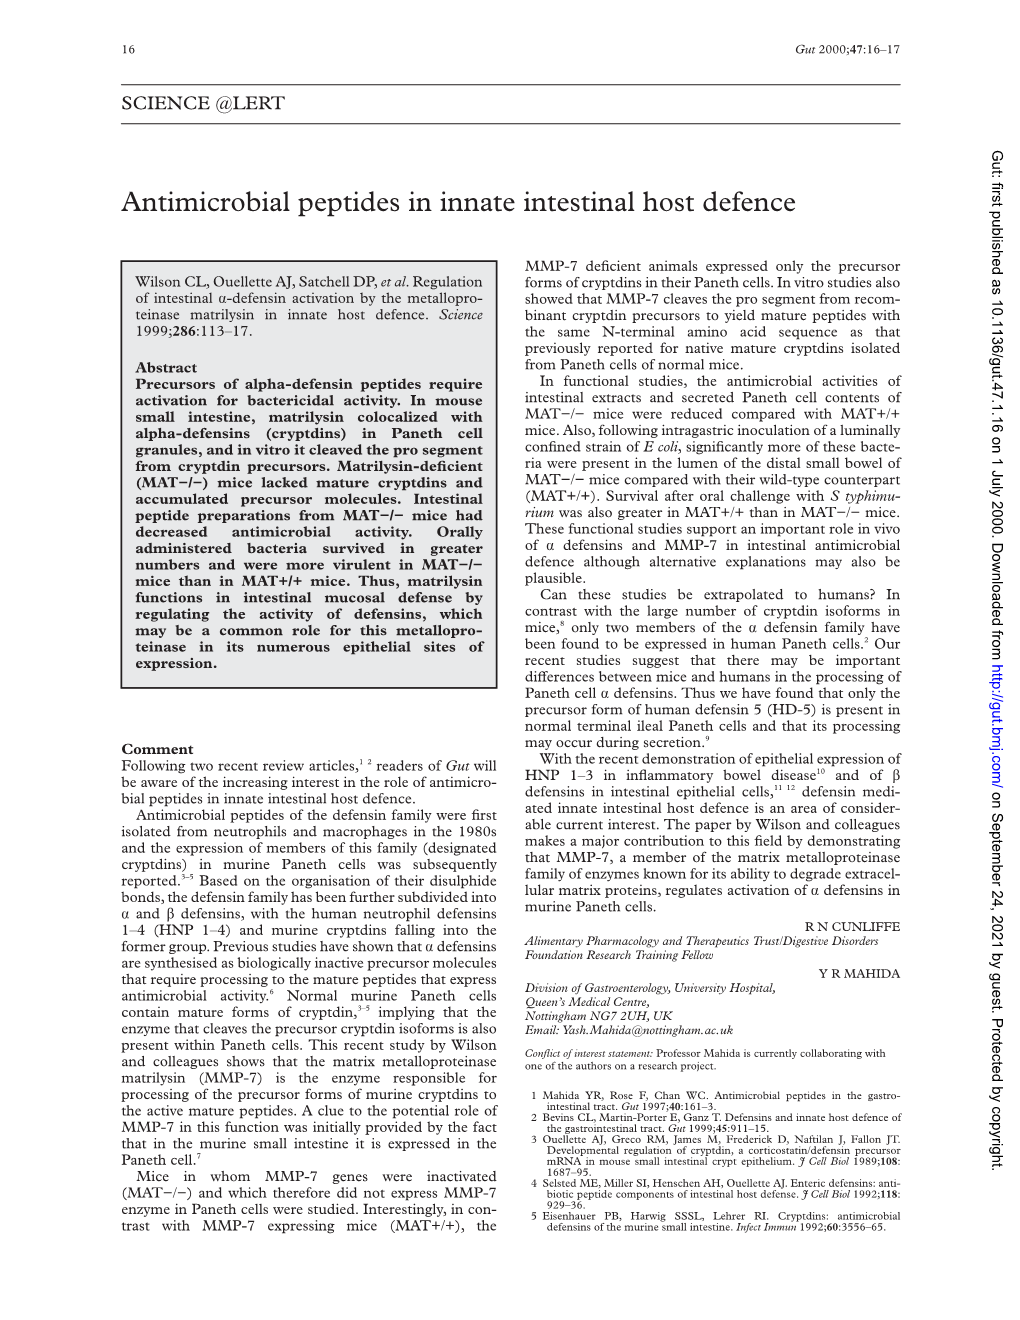 Antimicrobial Peptides in Innate Intestinal Host Defence